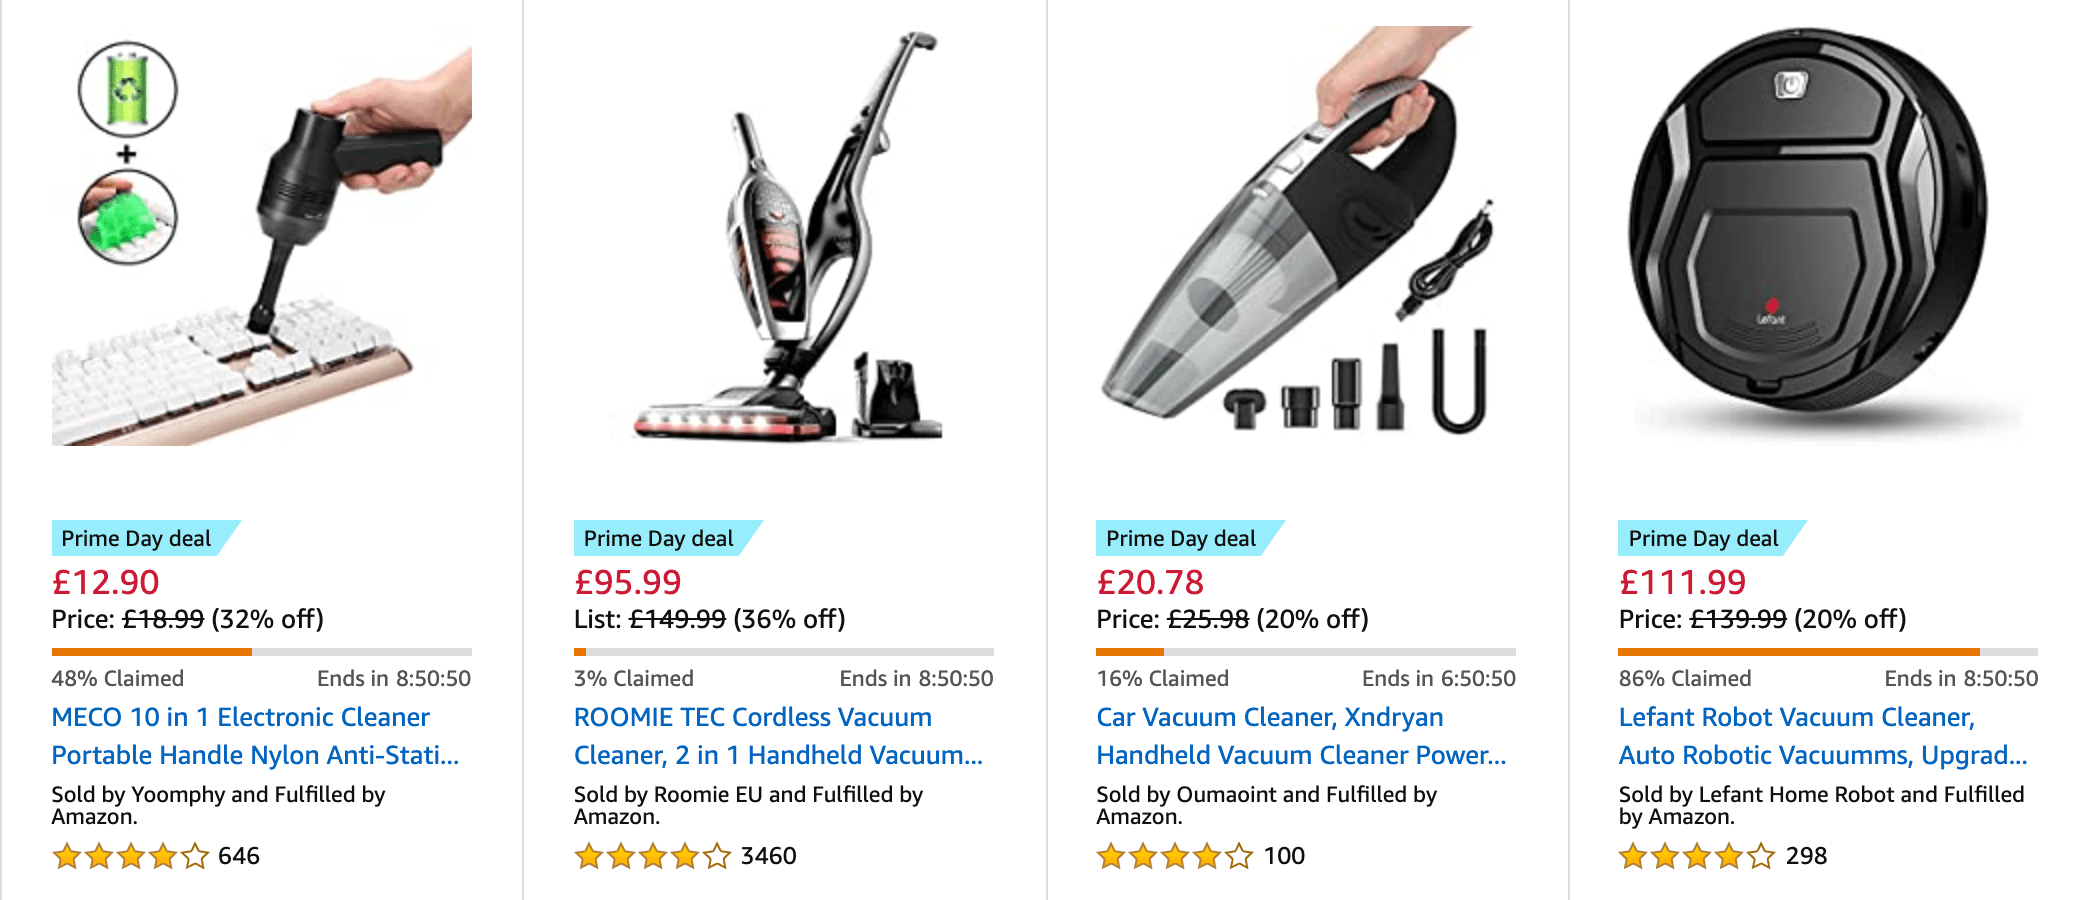 Amazon Prime Day Vacuum cleaner products